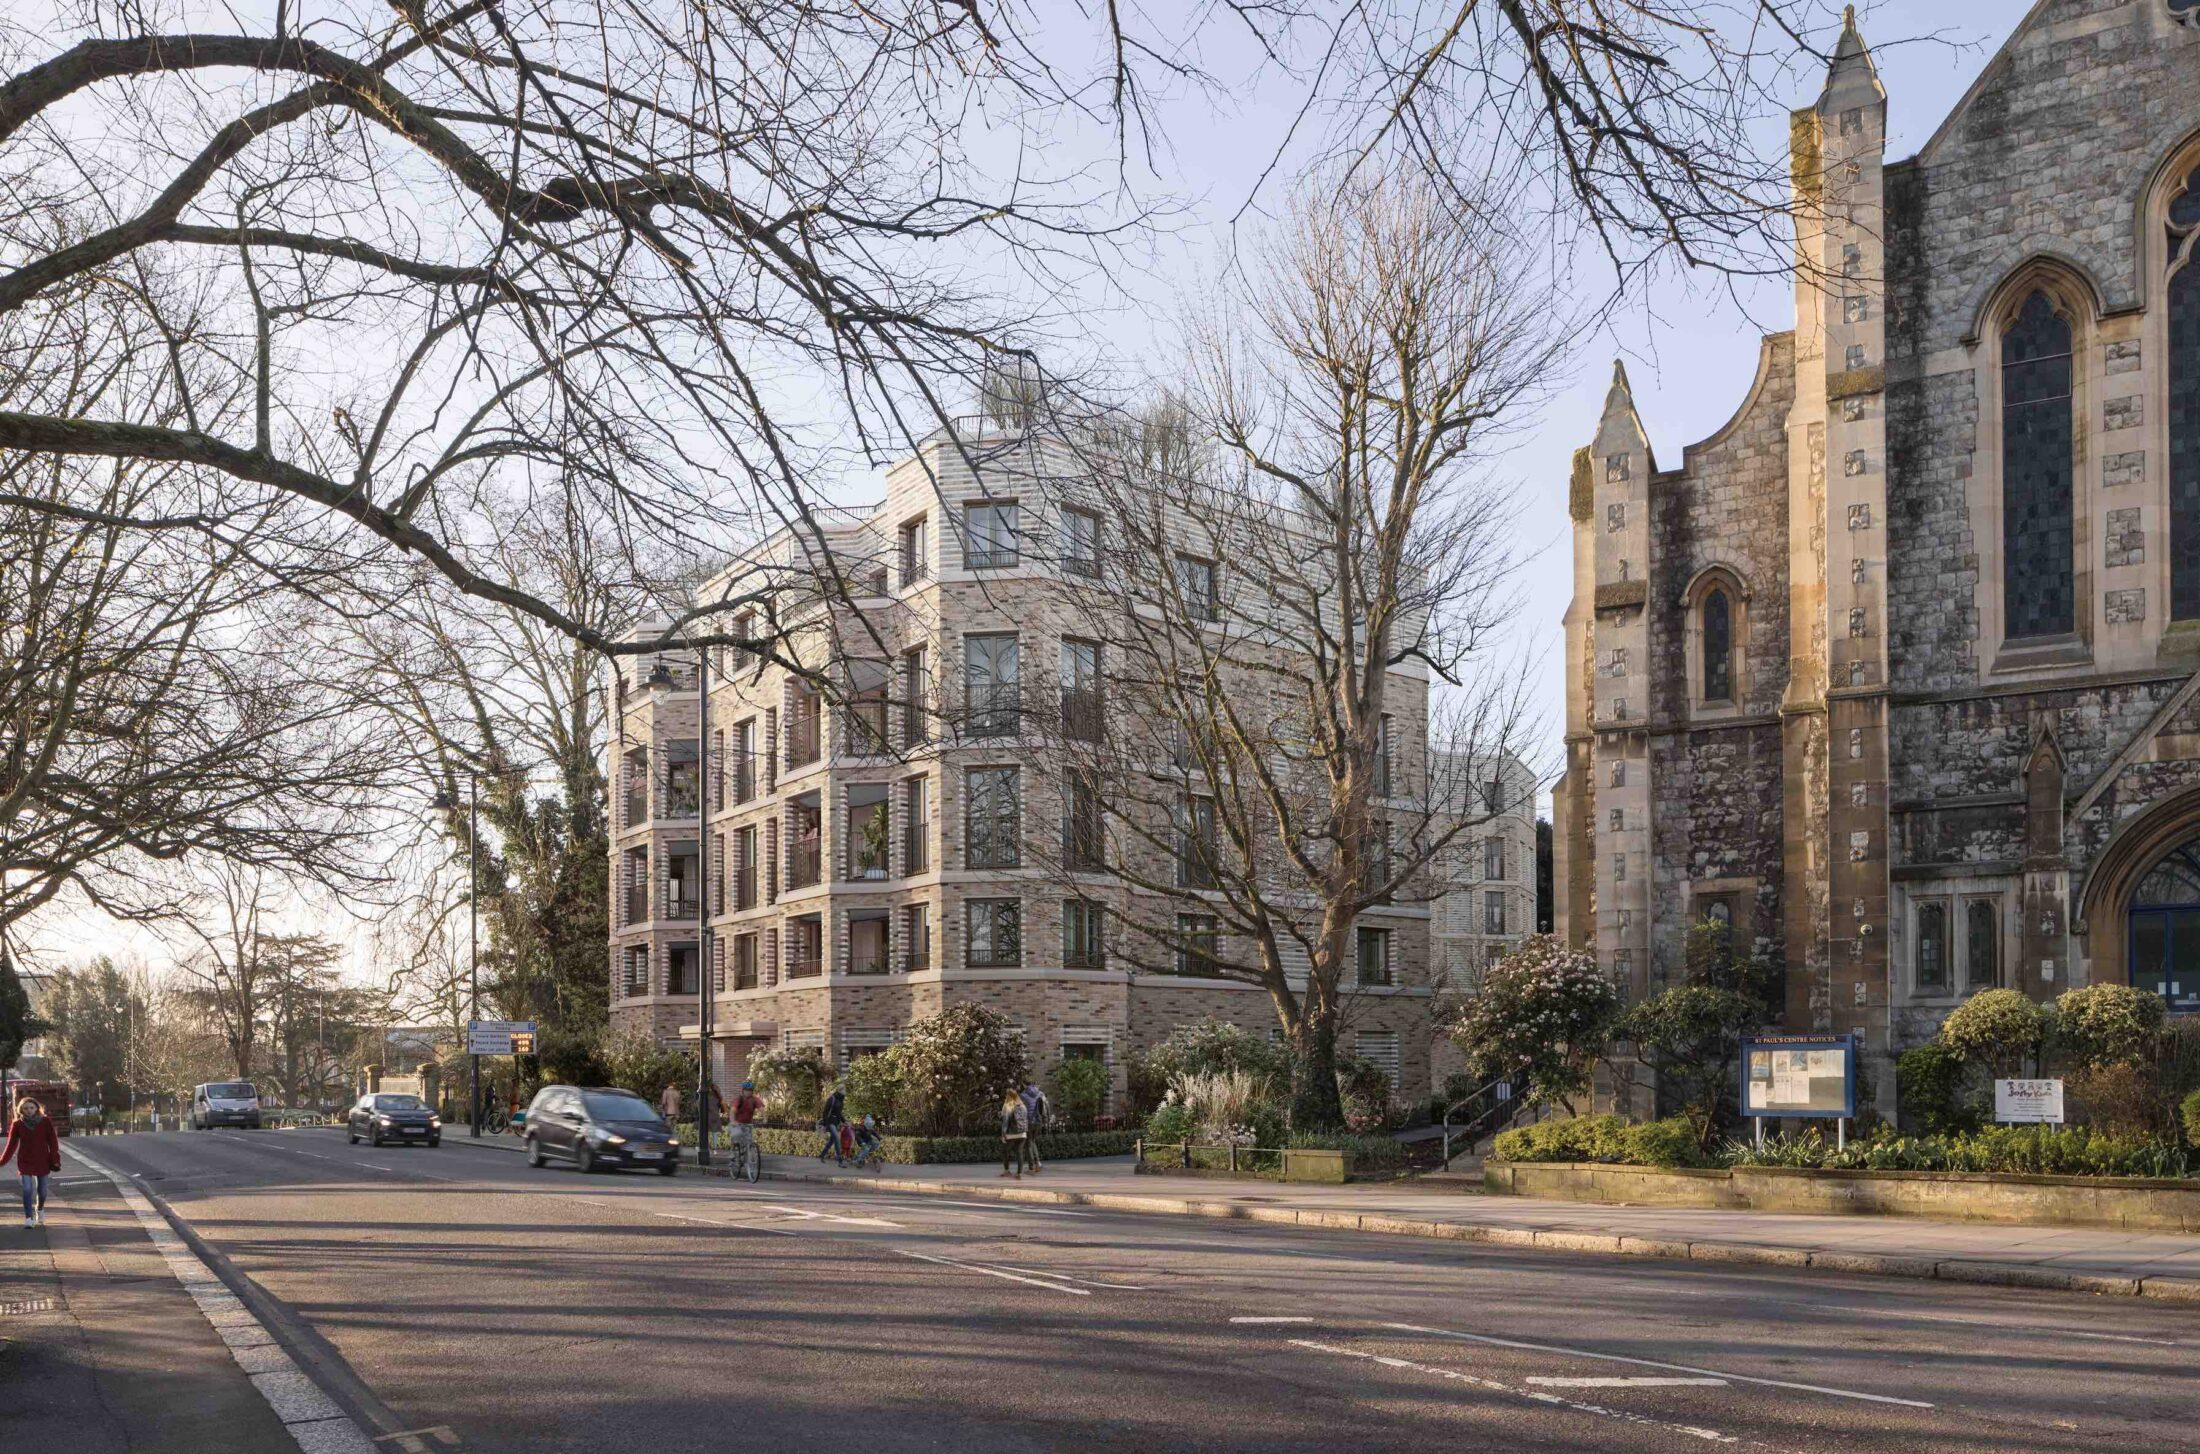 78 Apartments for Enfield Town Centre